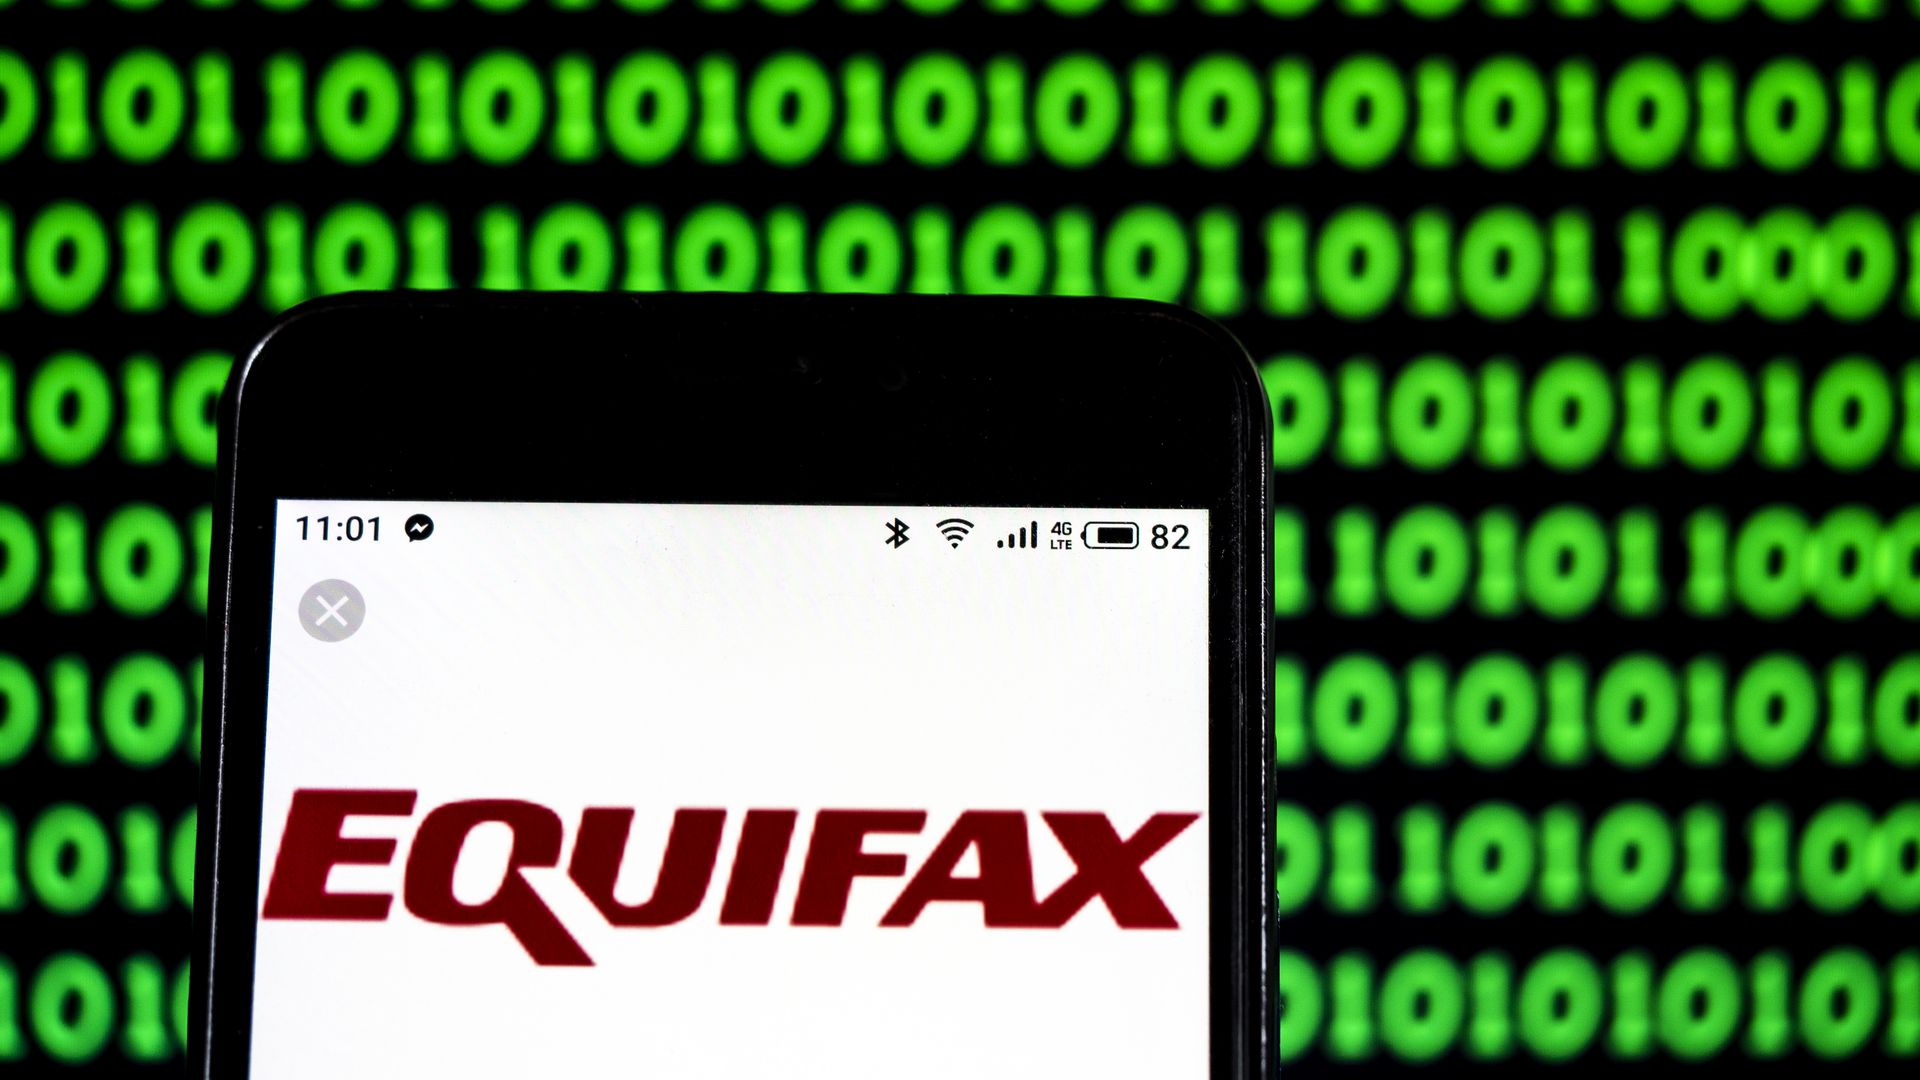 In this image, an iPhone is held close to the viewer against a green and black background of 1s and 0s. The phone screen is a white background with the logo 'Equifax' displayed in red.